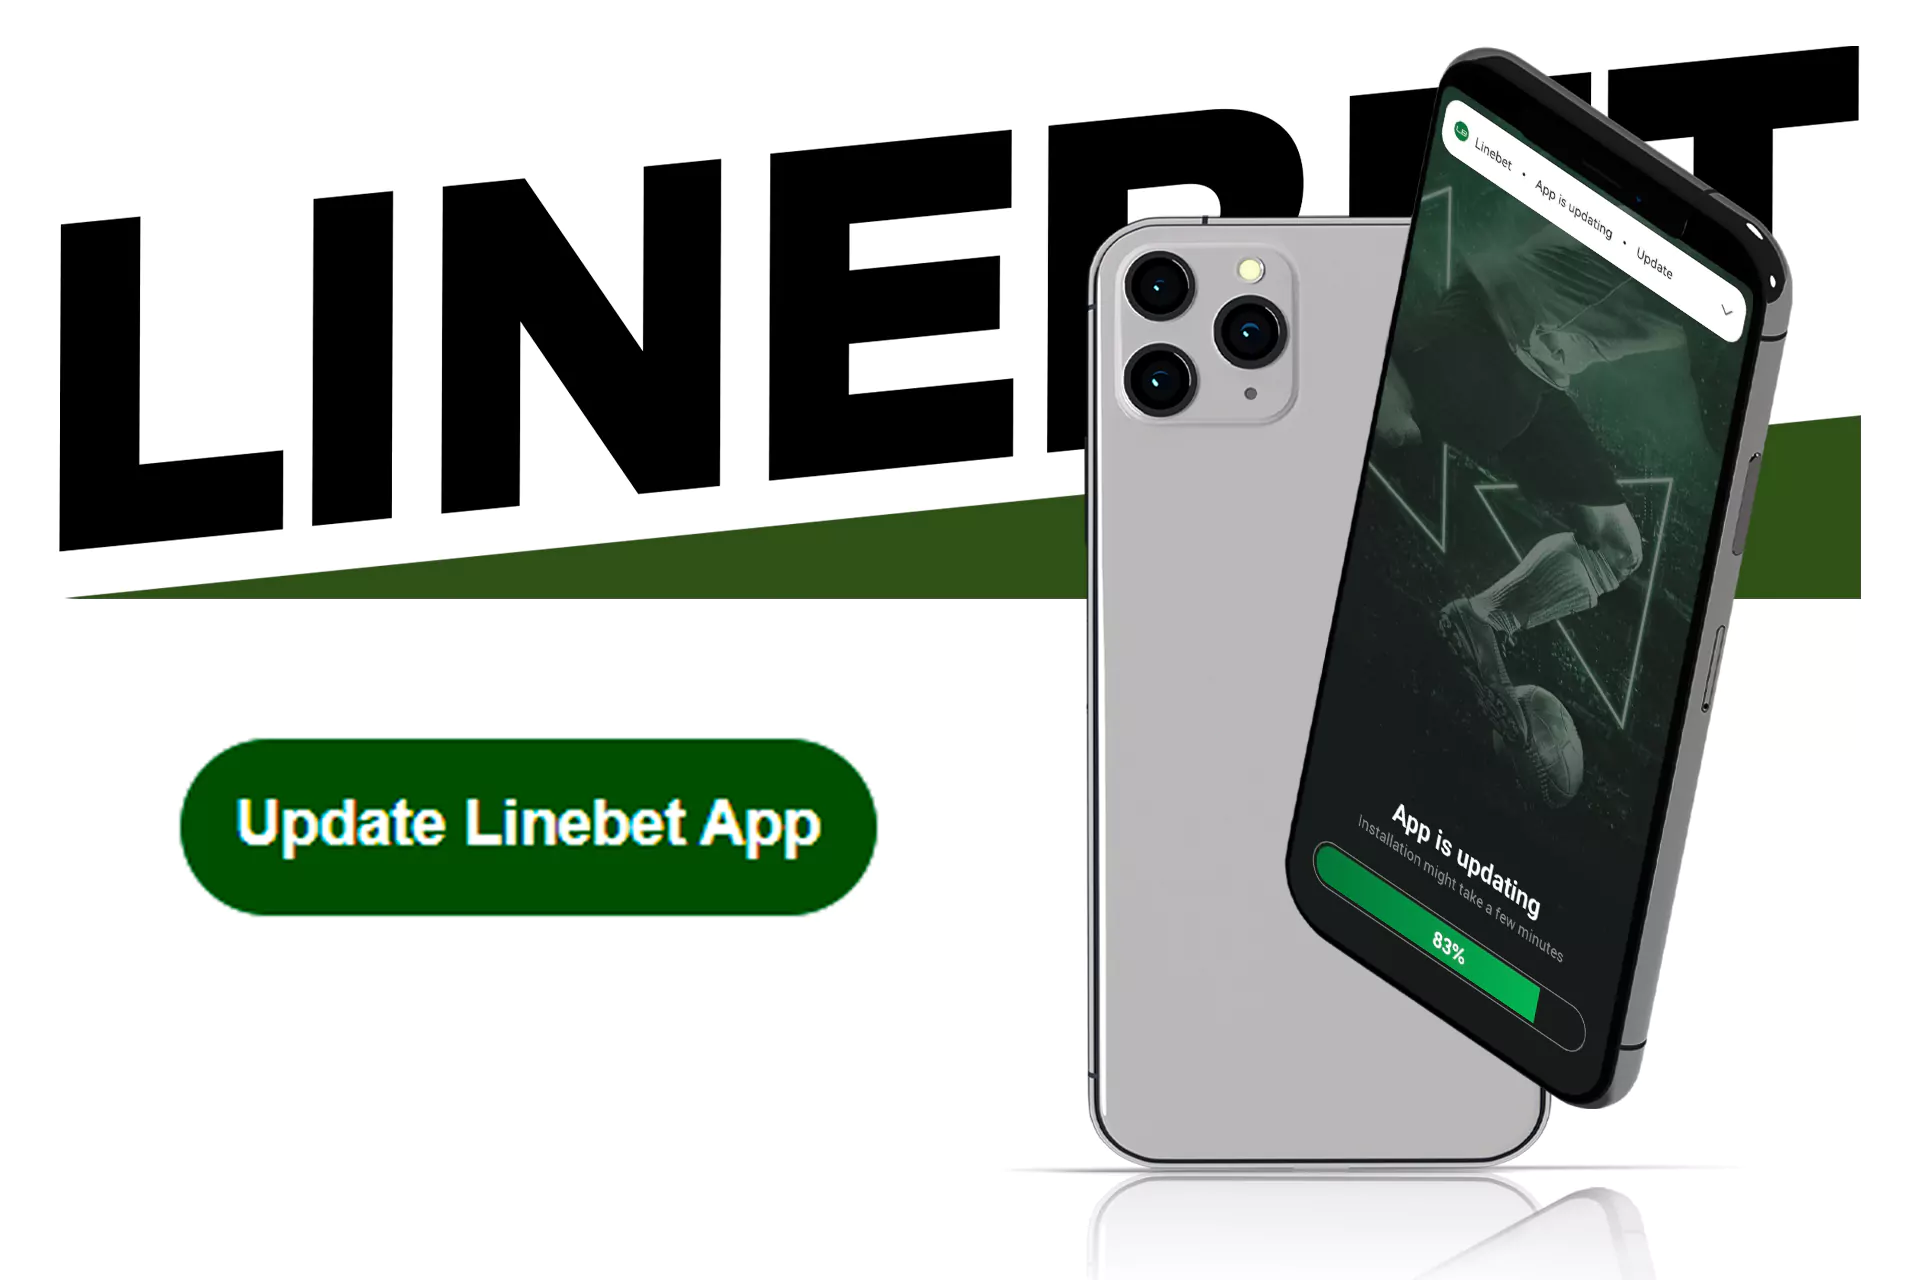 The Linebet app is regularly updated.